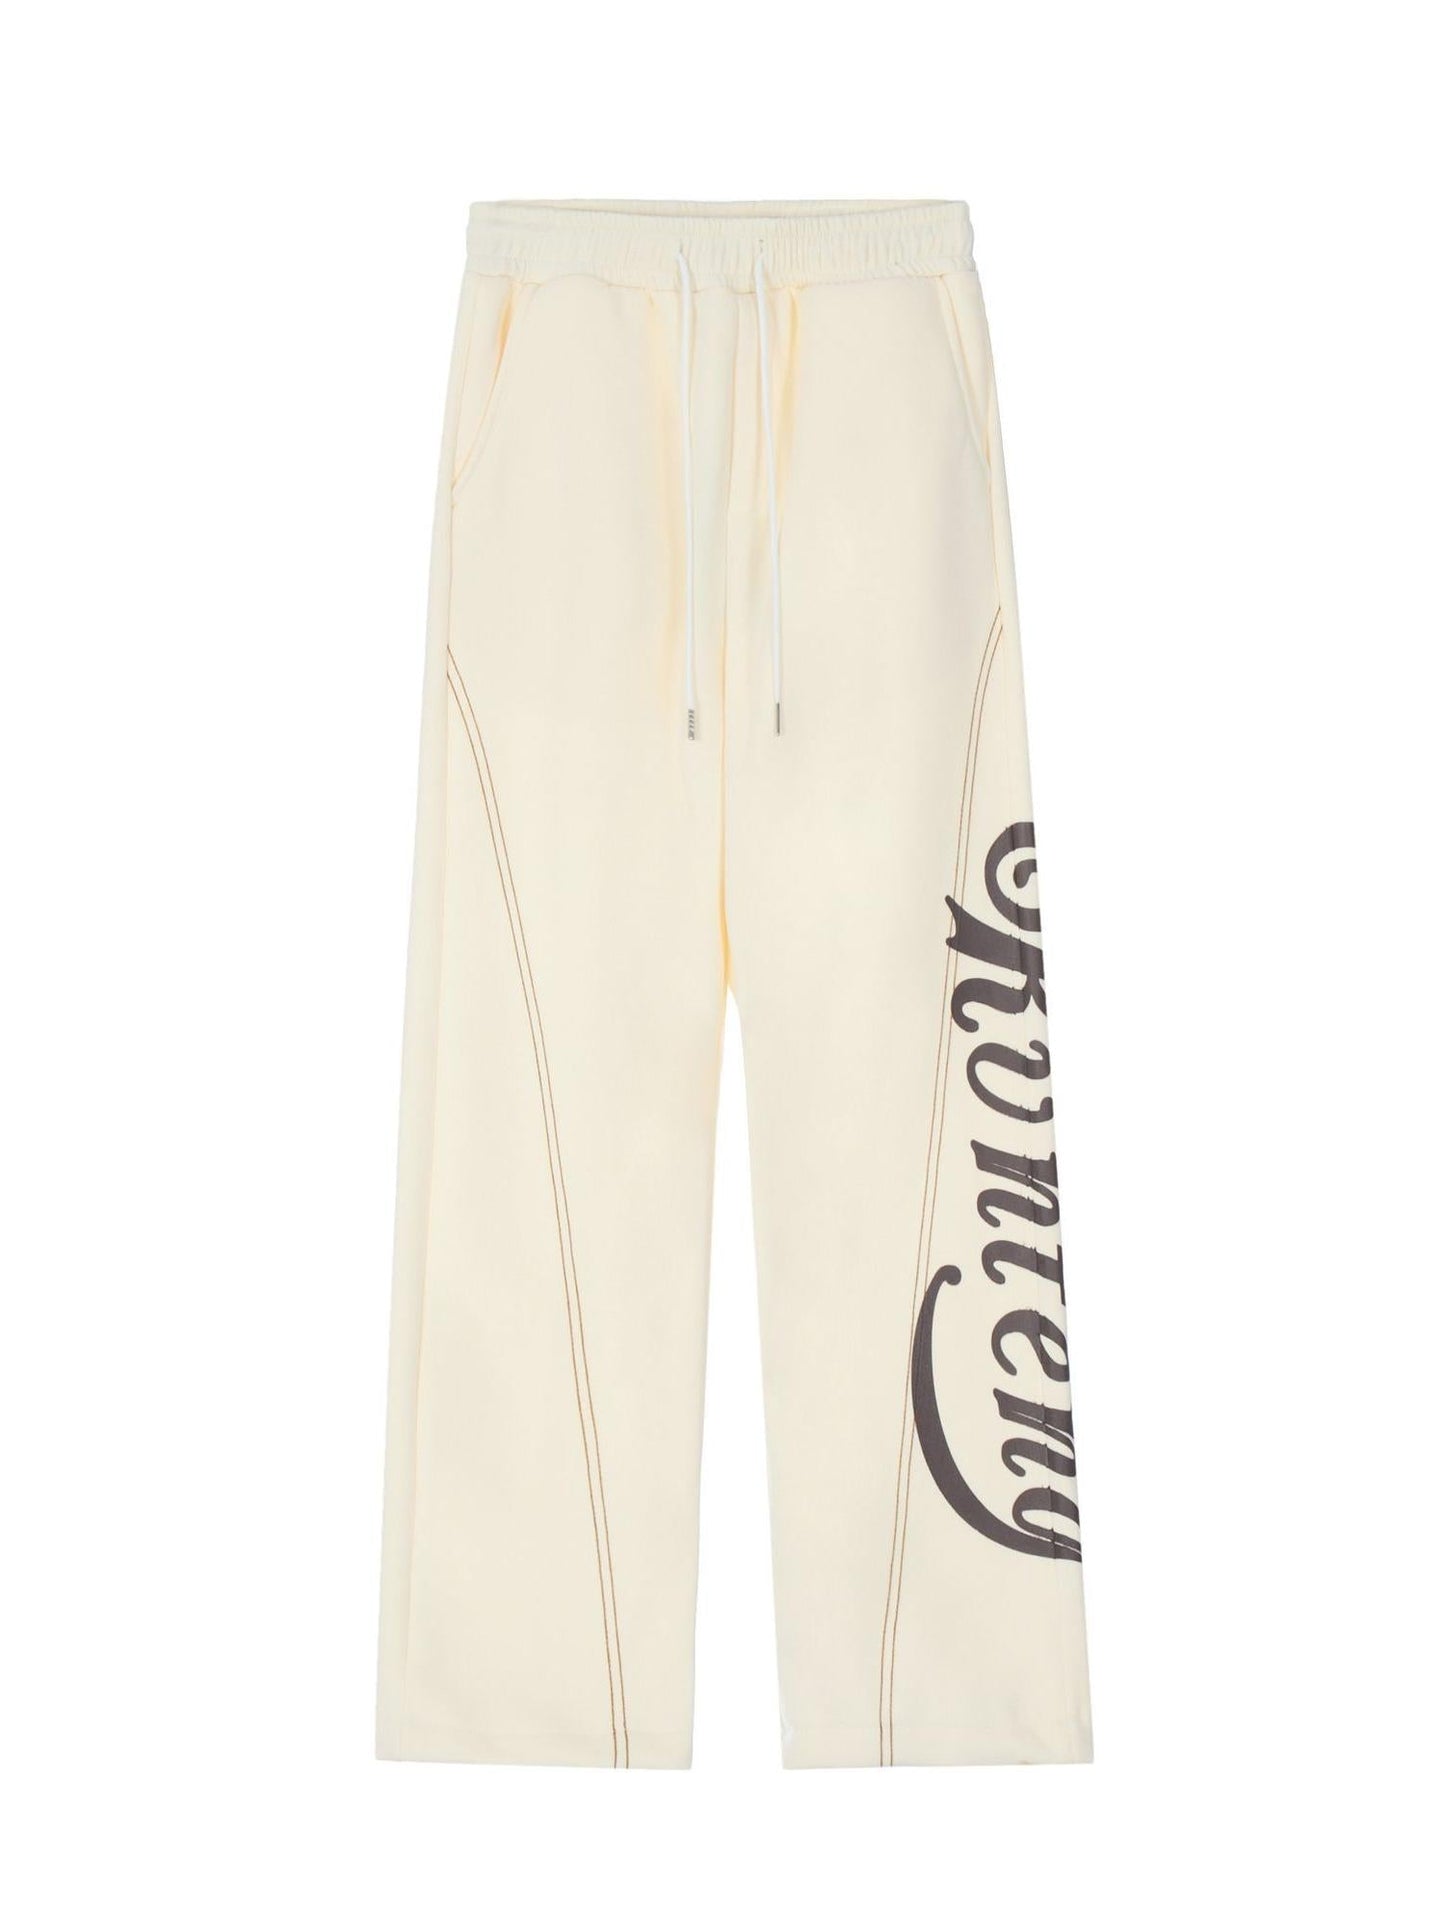 Old School Baggy Sweatpants with Letter Print